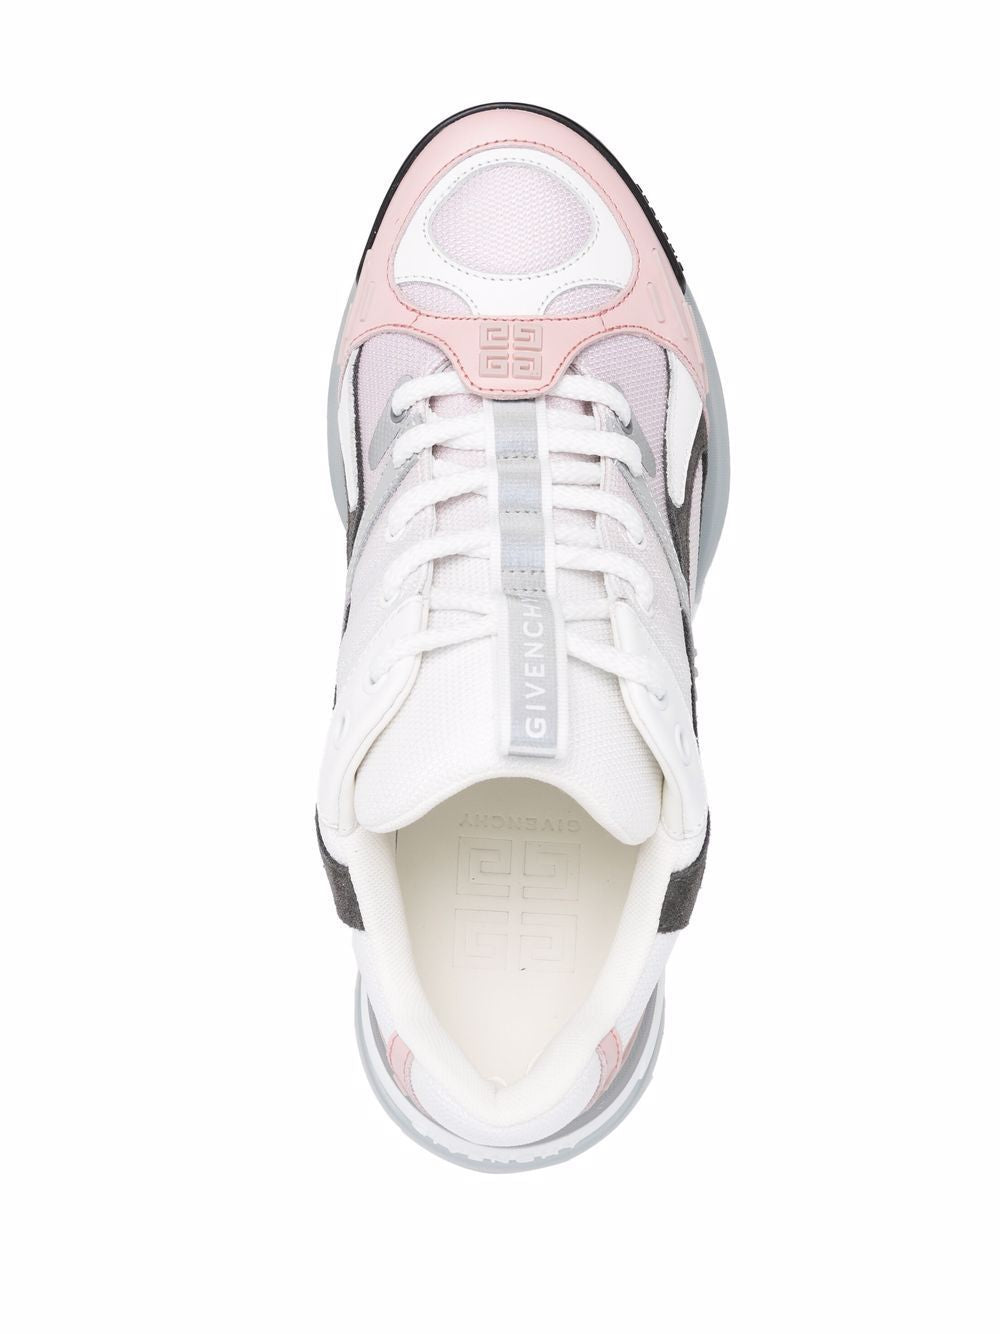 149 GIVENCHY GIV 1 TR SNEAKERS